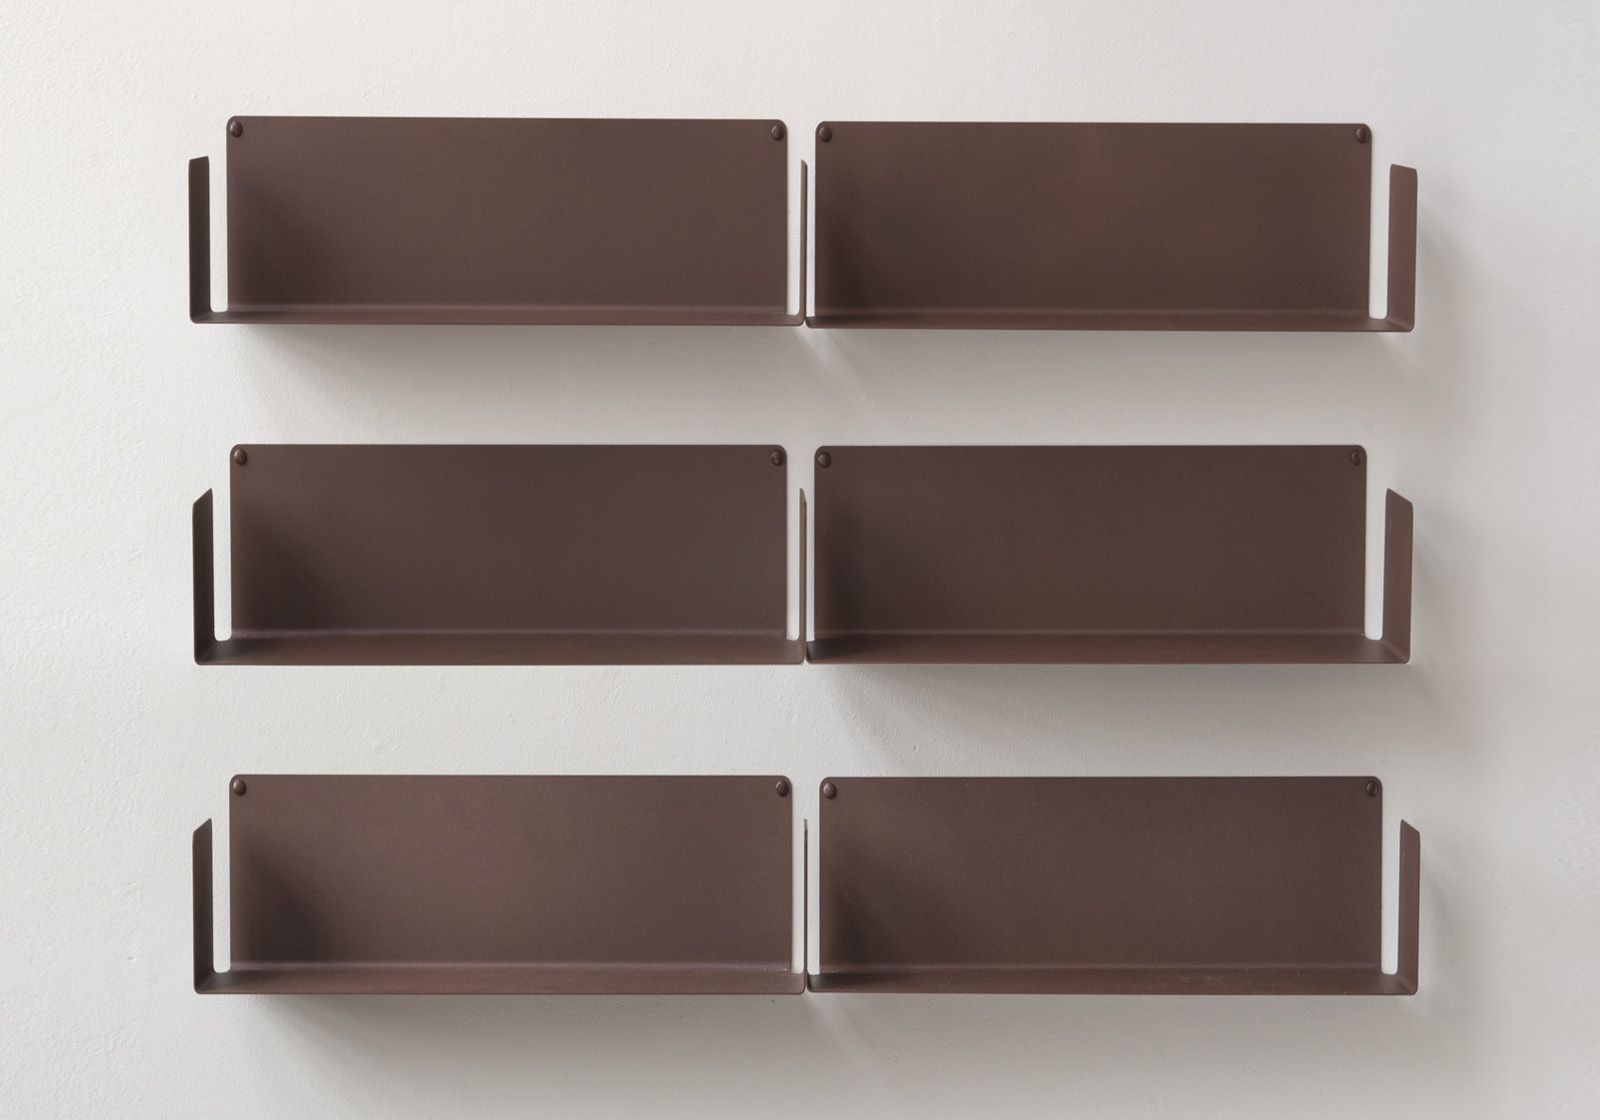 Floating shelf rust colour - 17.71 inches - Set of 6 Rust color shelves - 1